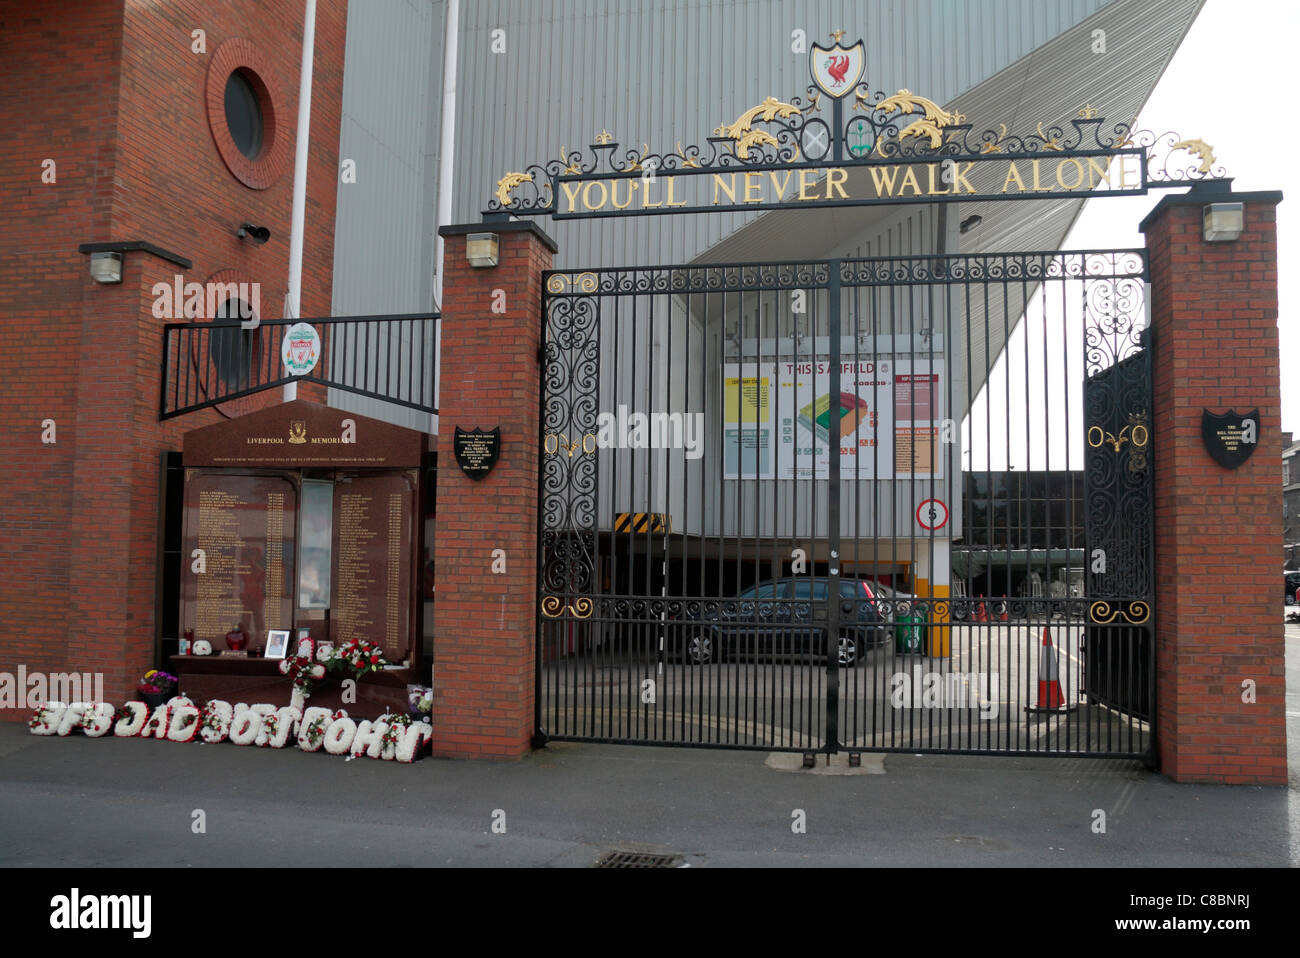 The Anfield Road gates to Anfield, beside the Hillsborough disaster memorial, Liverpool football club.  Aug 2011 Stock Photo